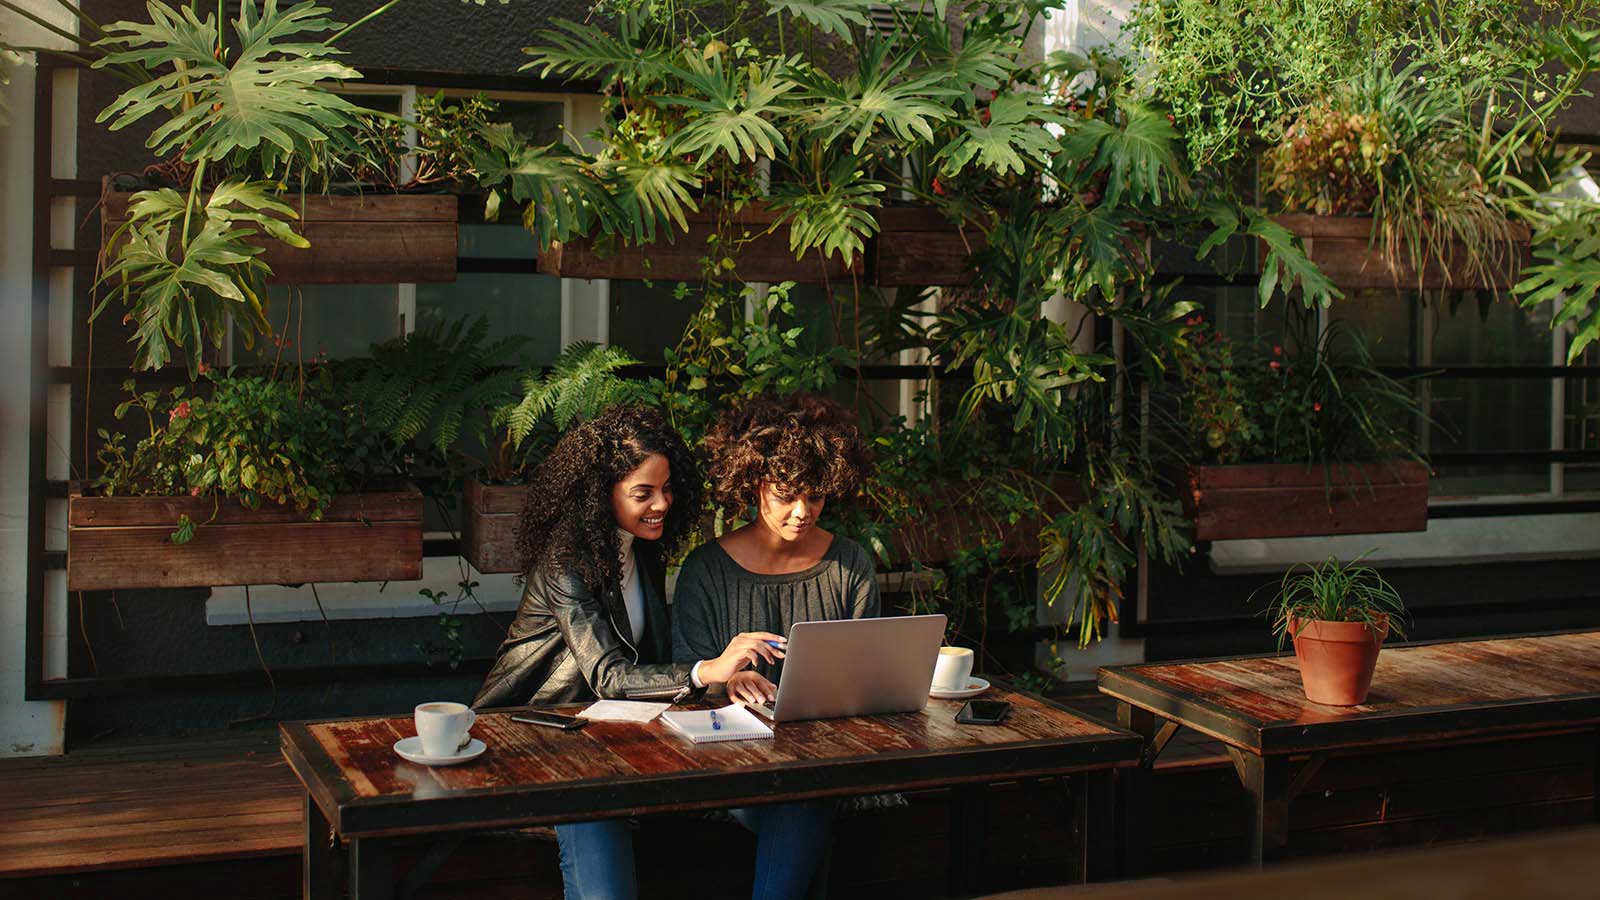 Two woman sitting in a stylish outdoor courtyard drinking coffee and looking at a laptop.